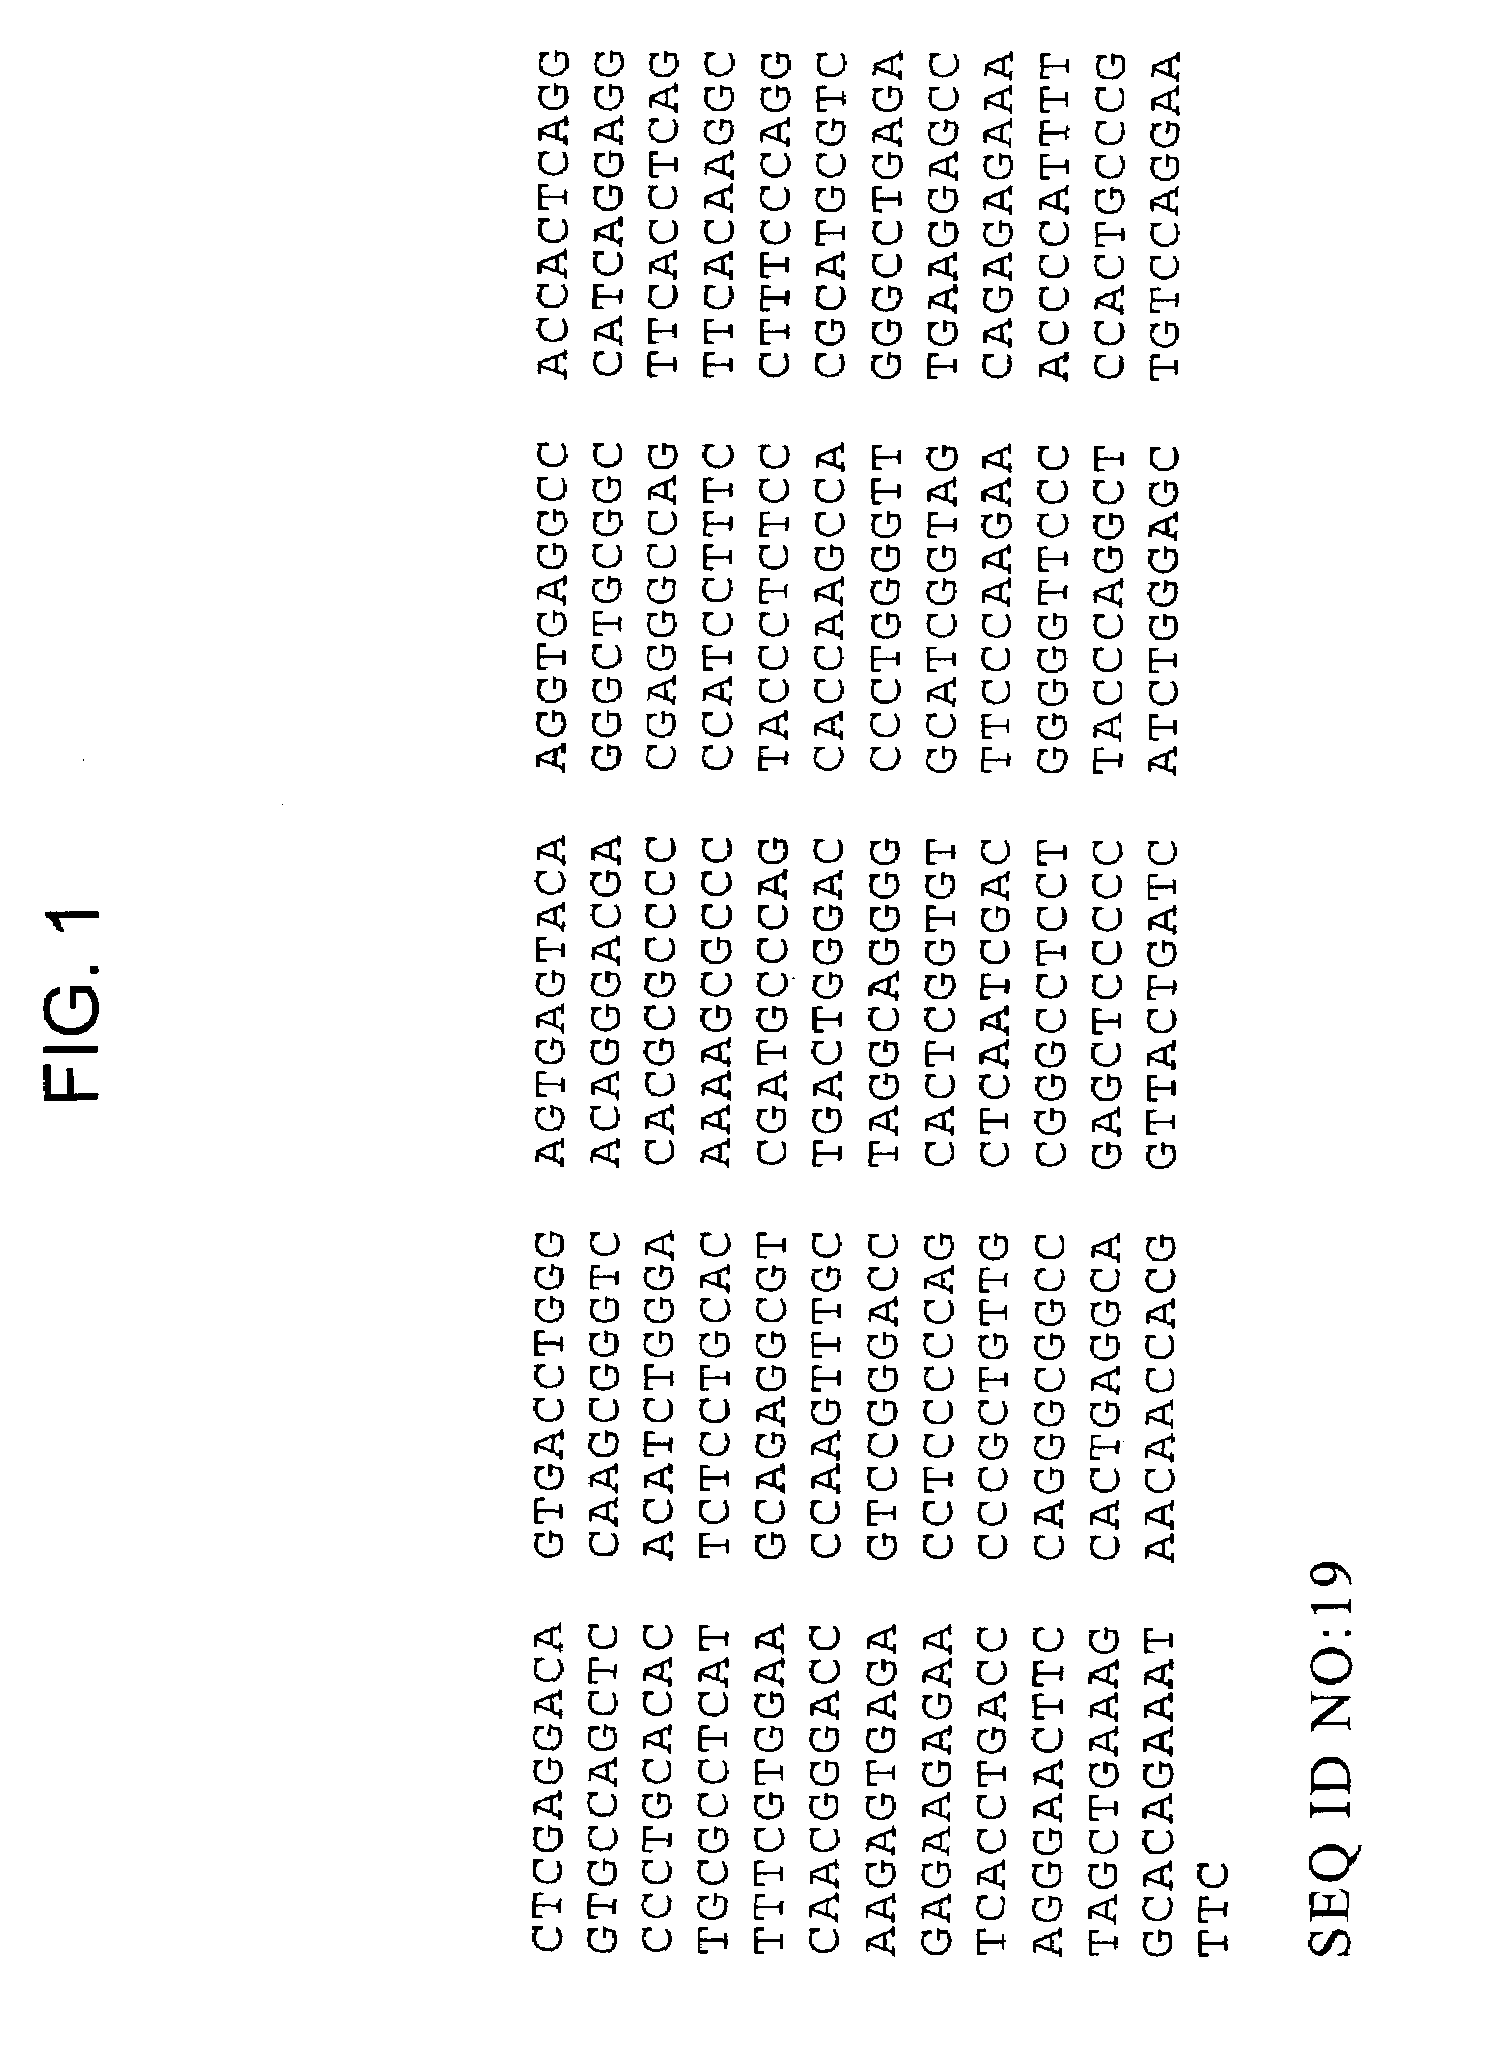 Methods of identifying compounds that modulate IL-4 receptor-mediated IgE synthesis utilizing a c-MYC protein